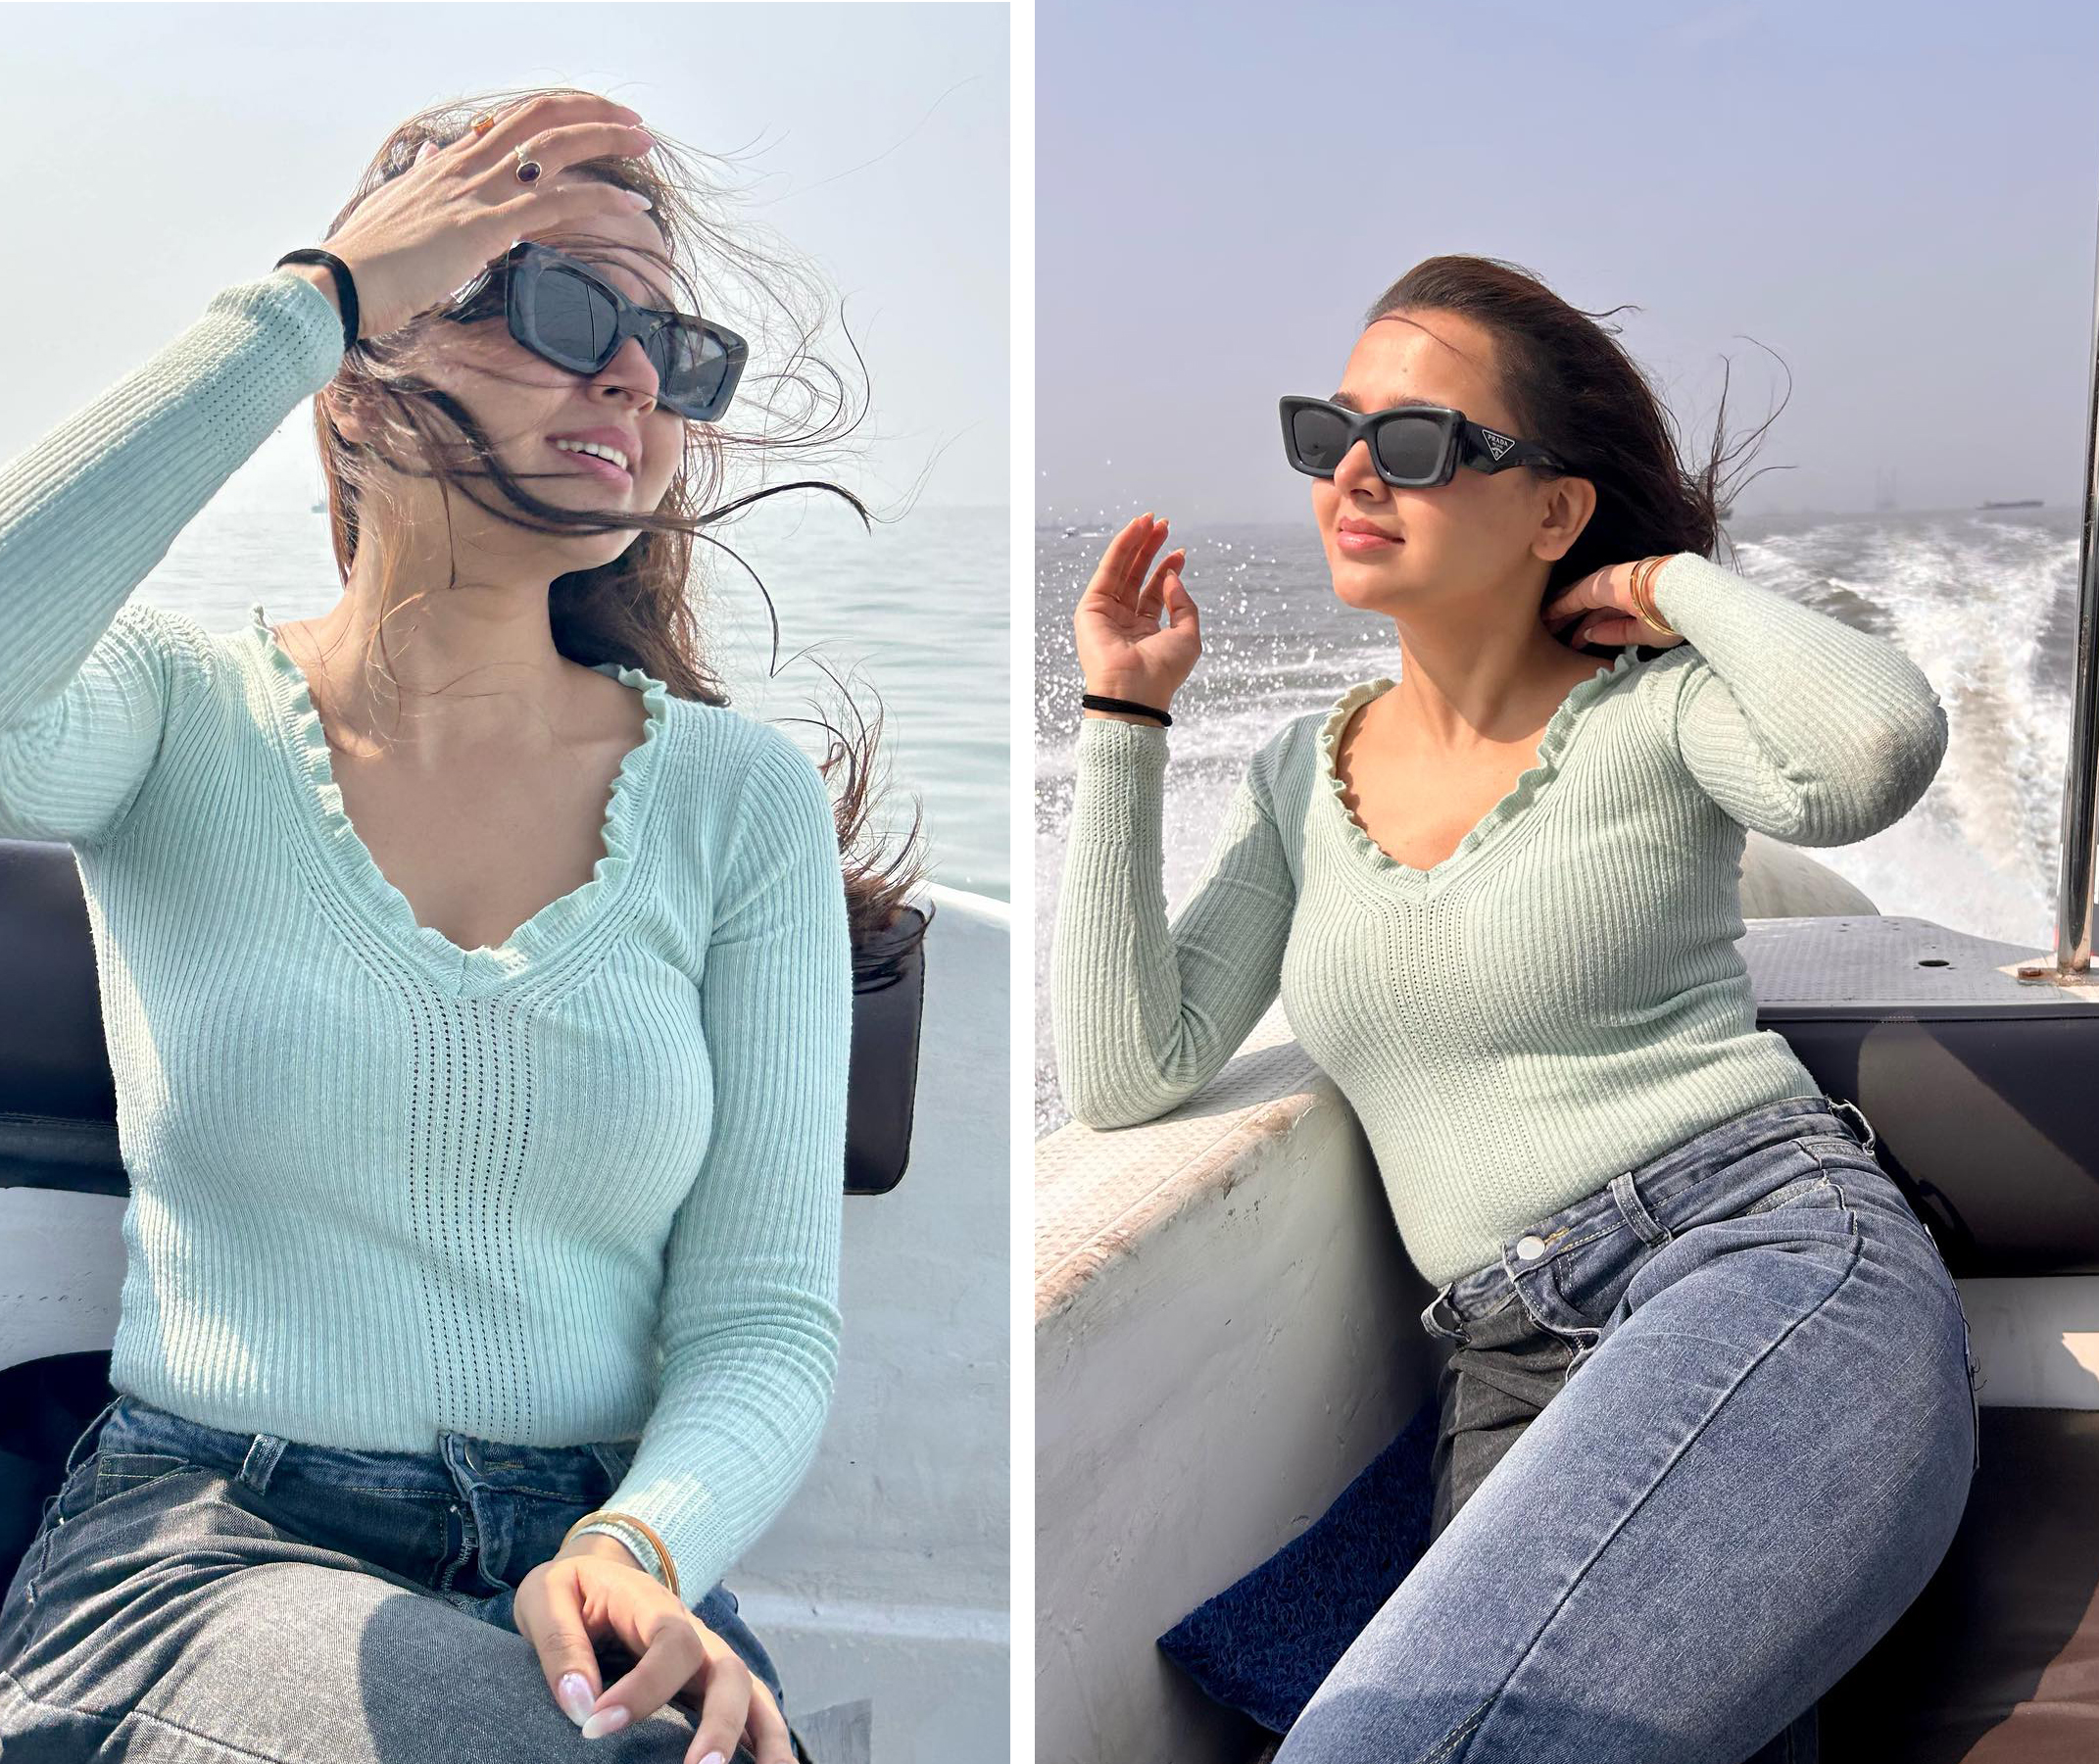 Bigg Boss 15 And Television Series Fame Actress Tejasswi Prakash Shared Her Pictures From Her Boat Adventure